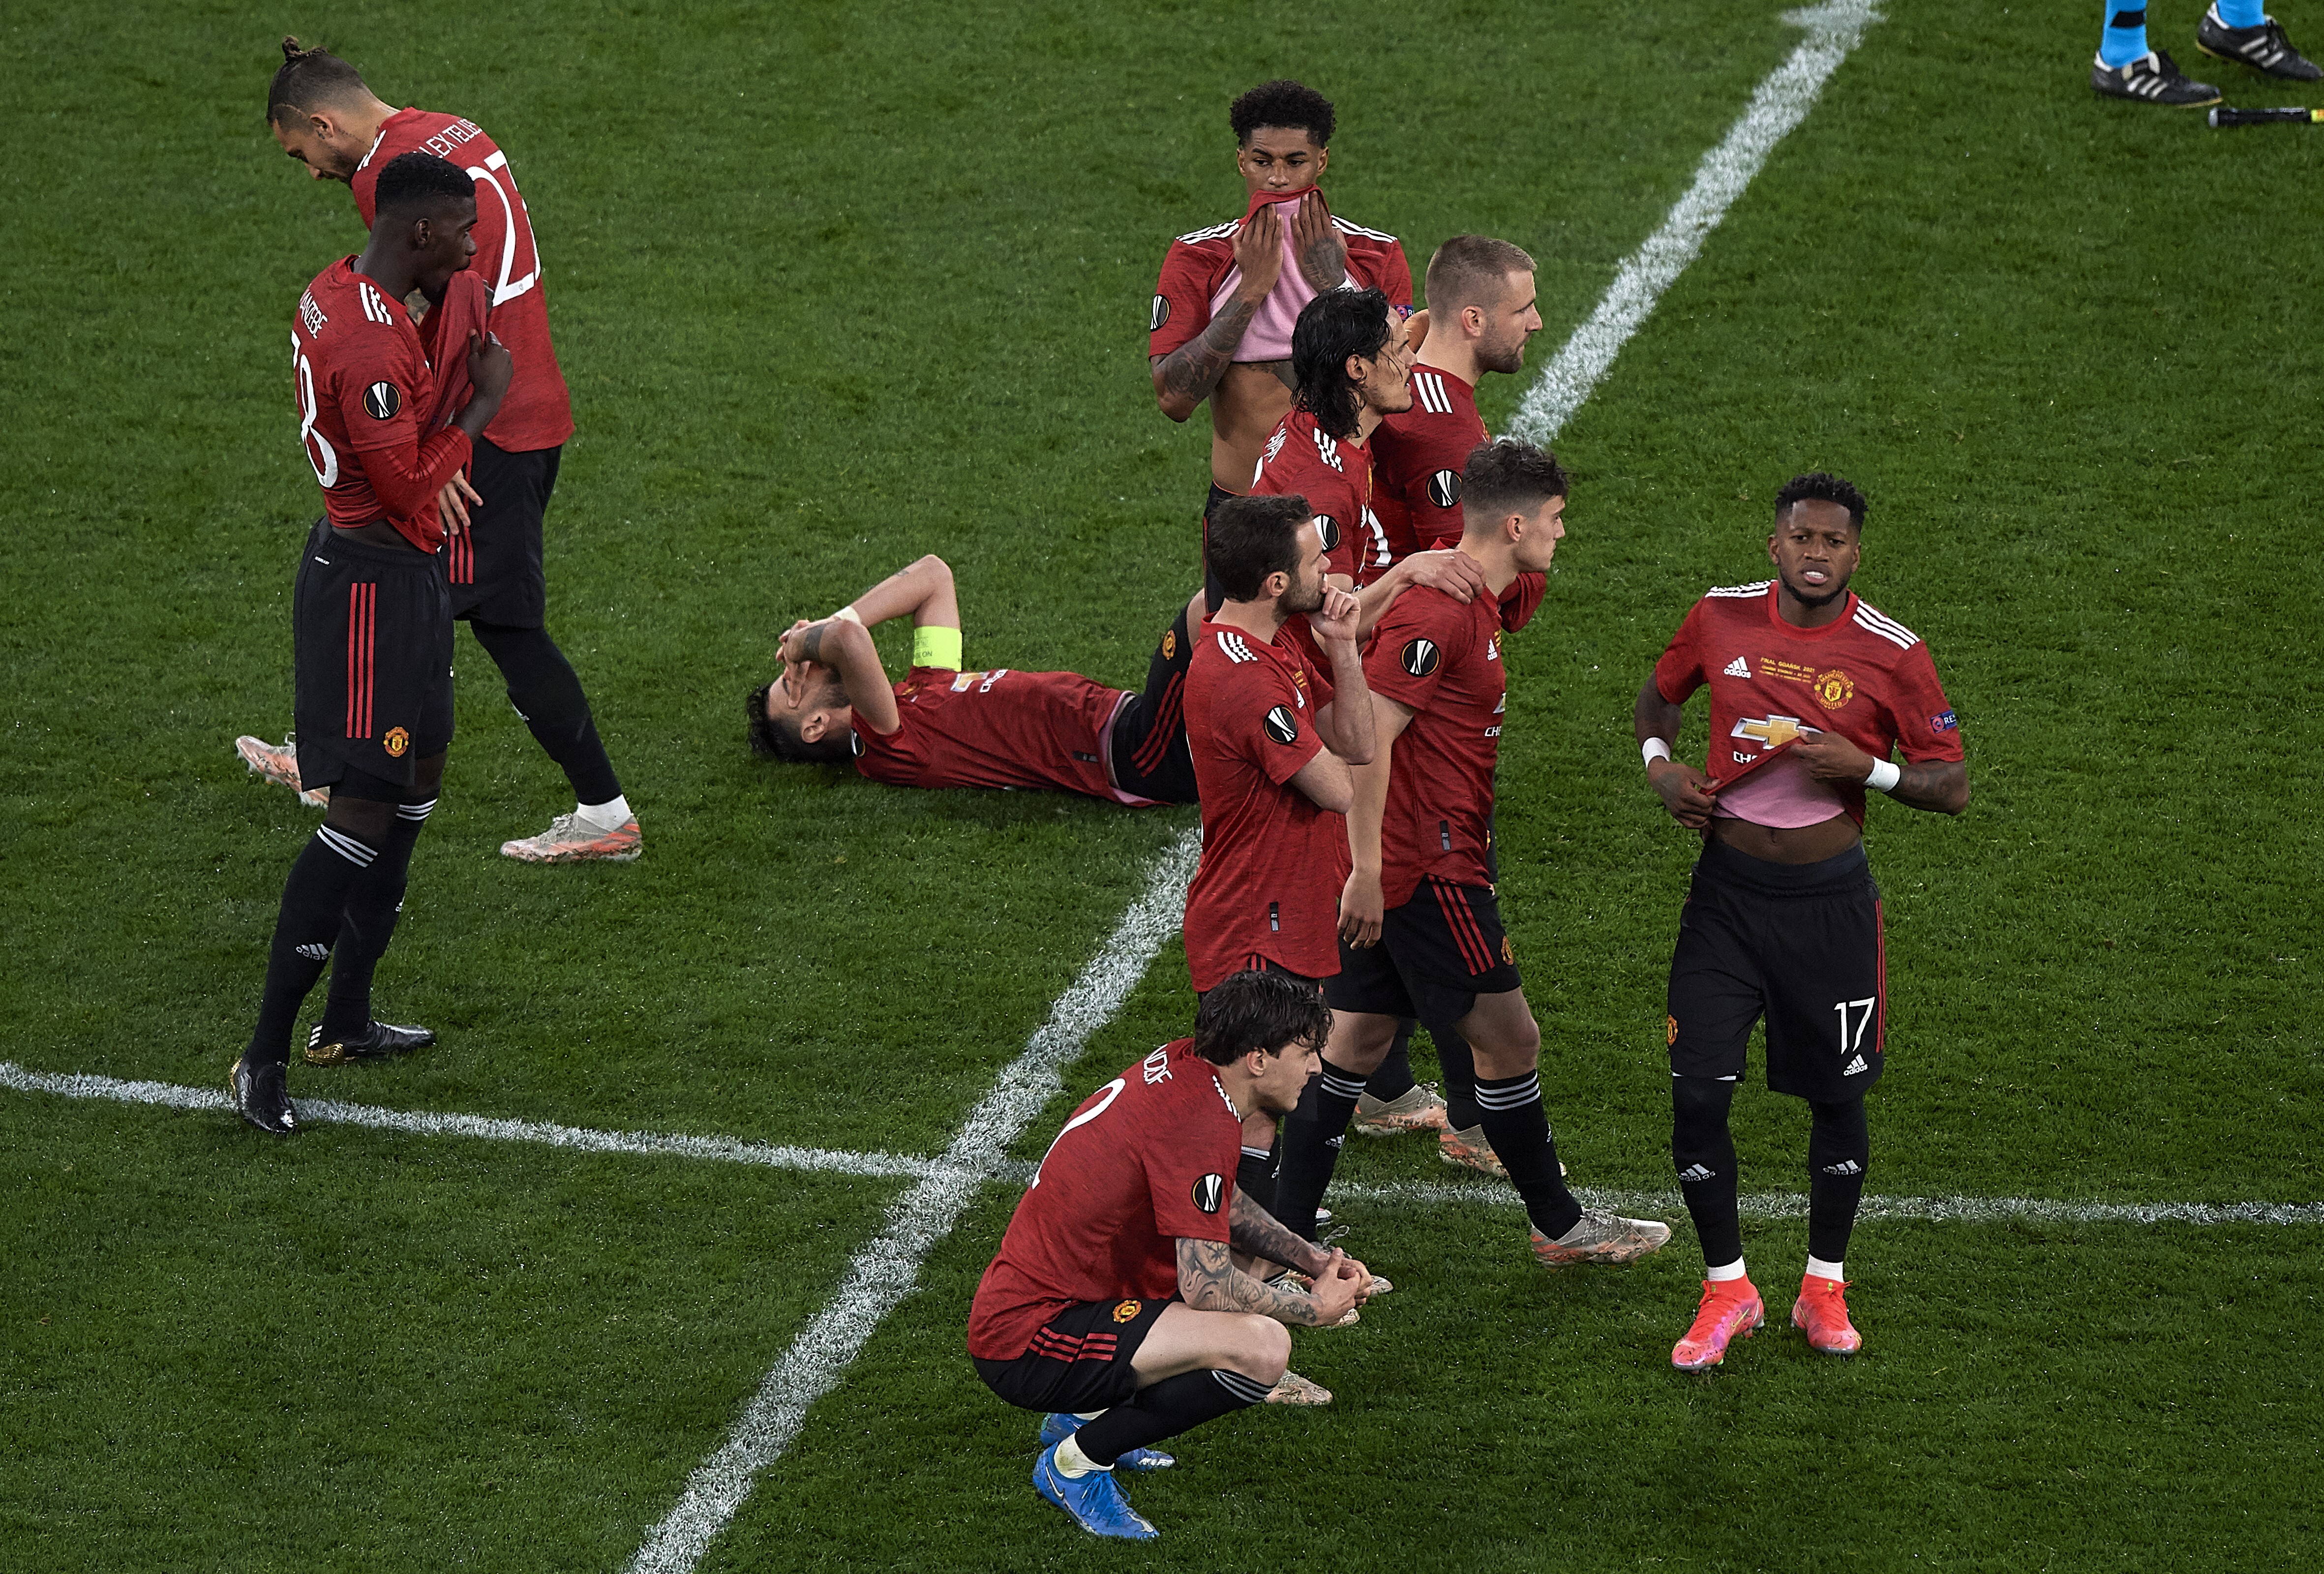 Manchester United players react after losing the Uefa Europa League final against Villarreal in Gdansk, Poland. Photo: Xinhua